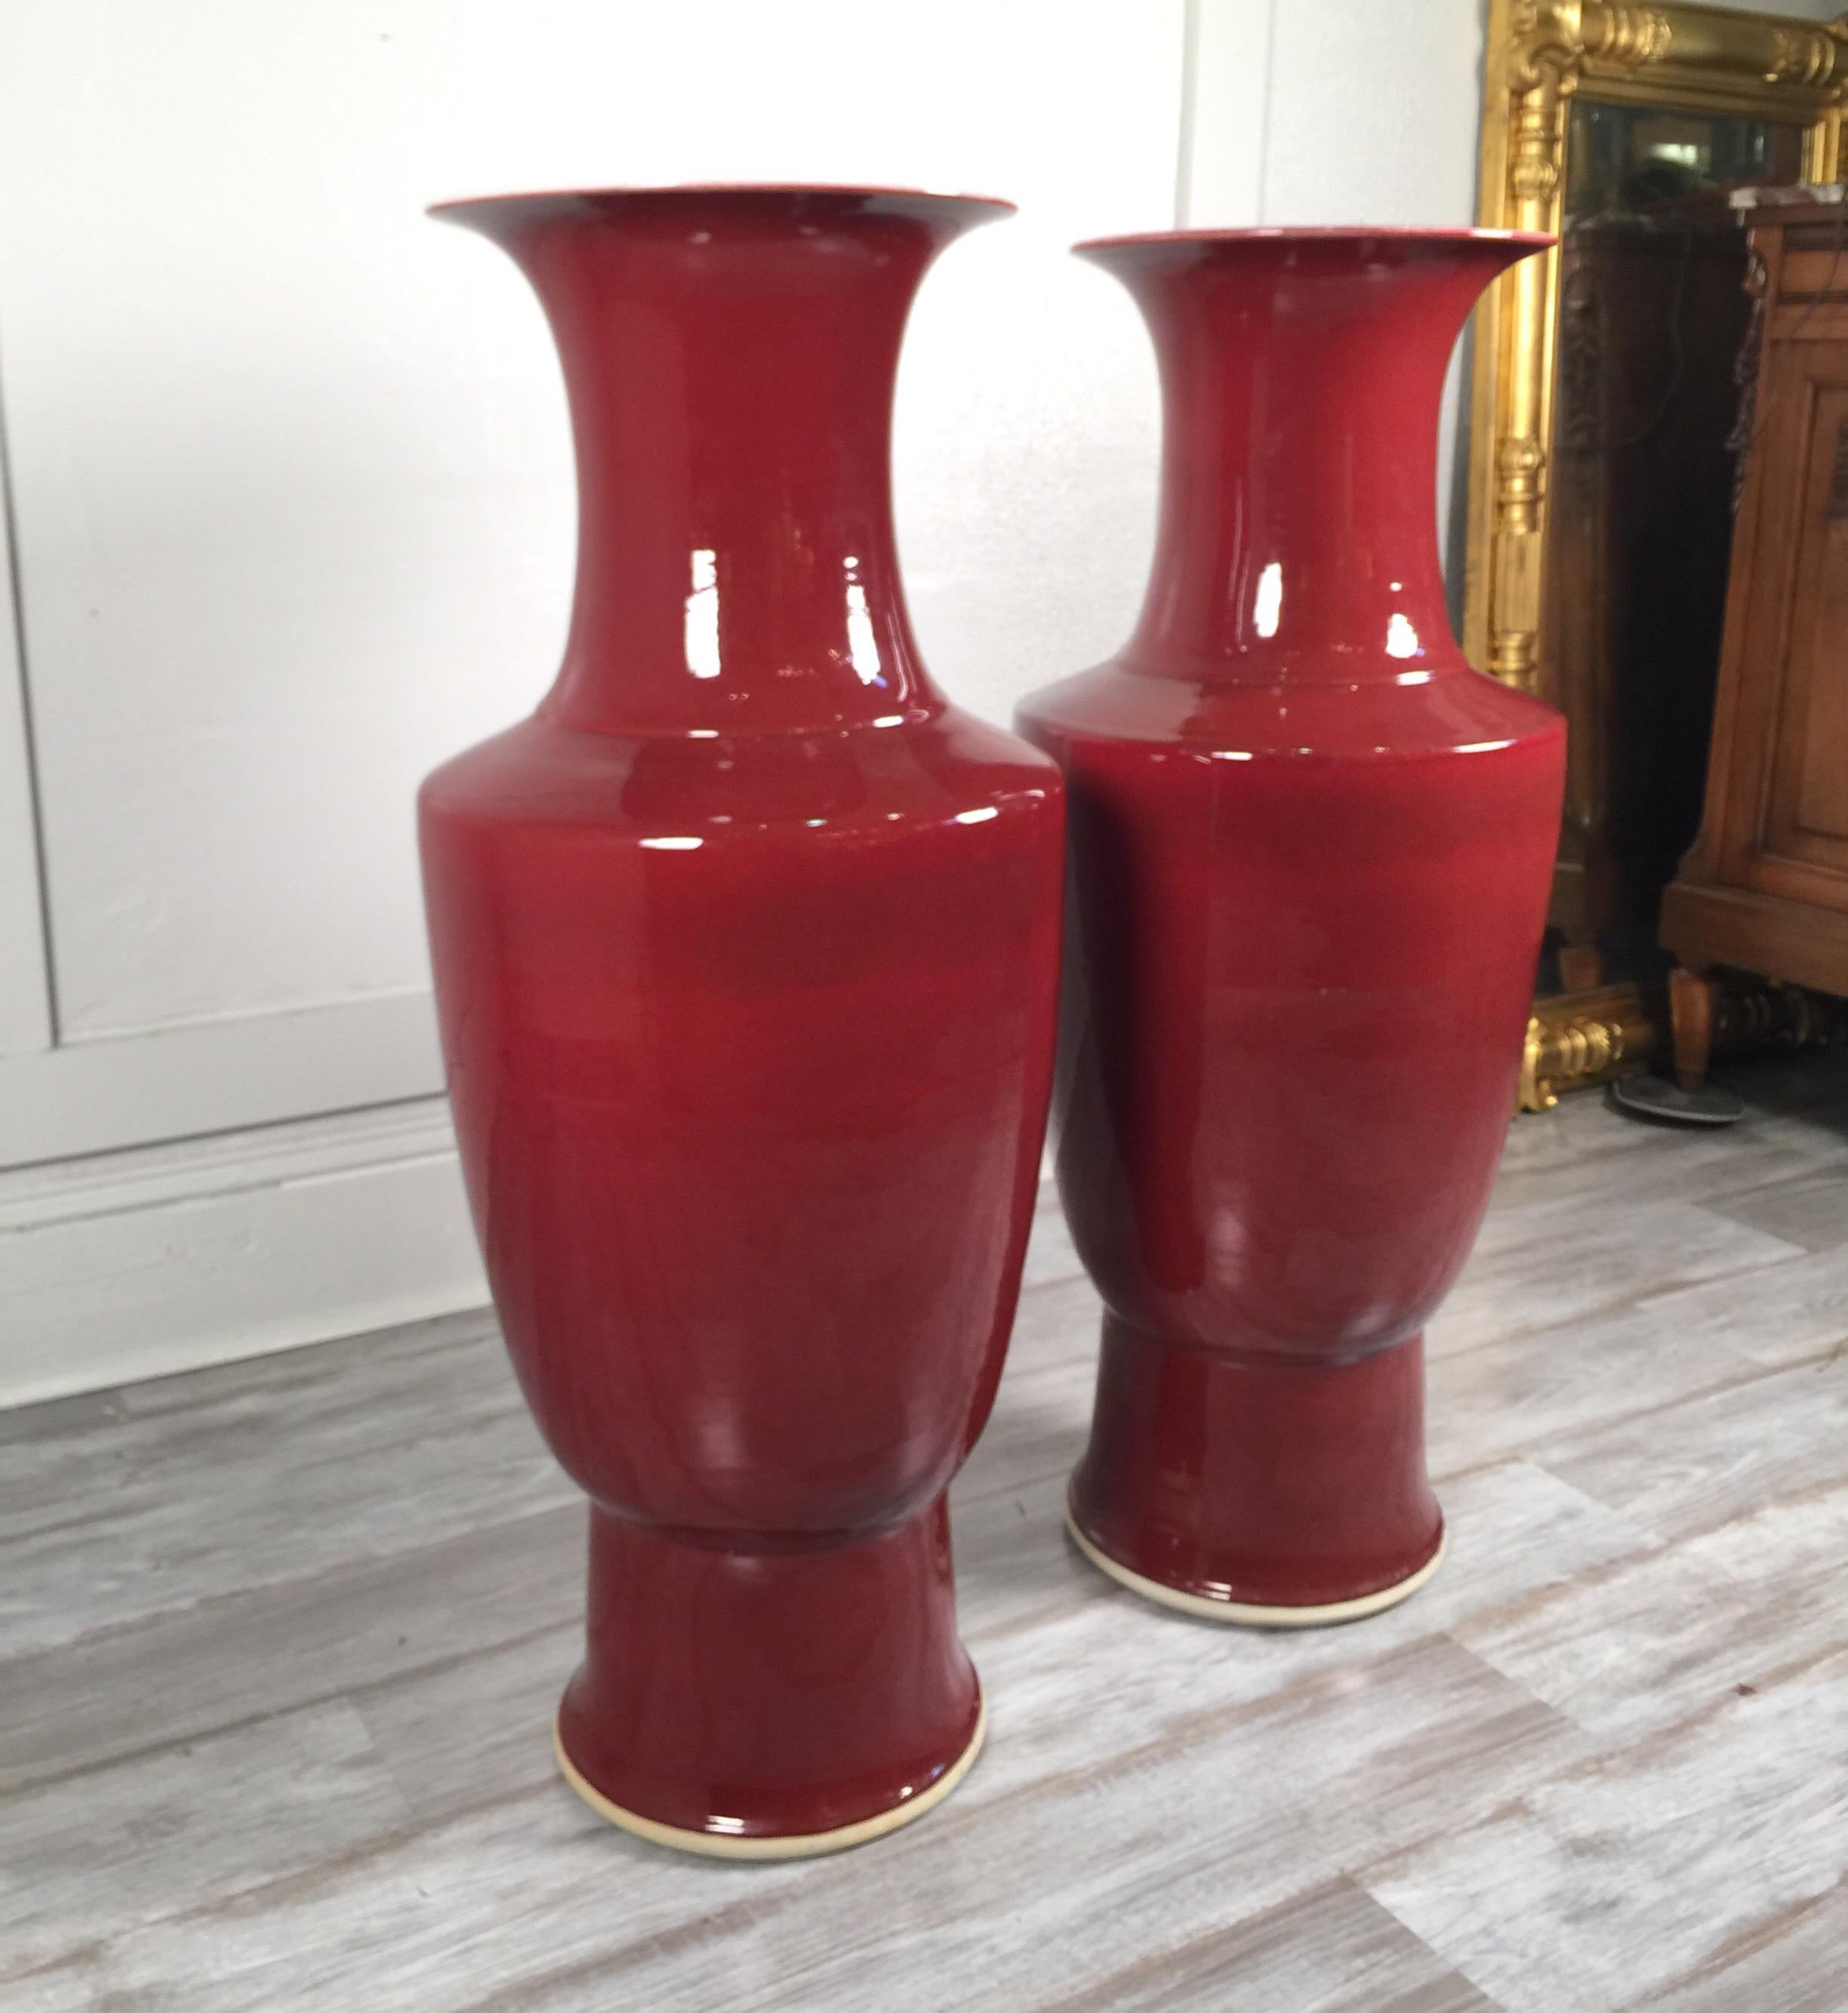 Impressive pair of Chinese porcelain Sang-de-Boeuf 3 ft tall floor vases.
Also called flambé glaze, a glossy, rich, blood red glaze often slashed with streaks of purple or turquoise used to decorate pottery, particularly porcelain. The effect is